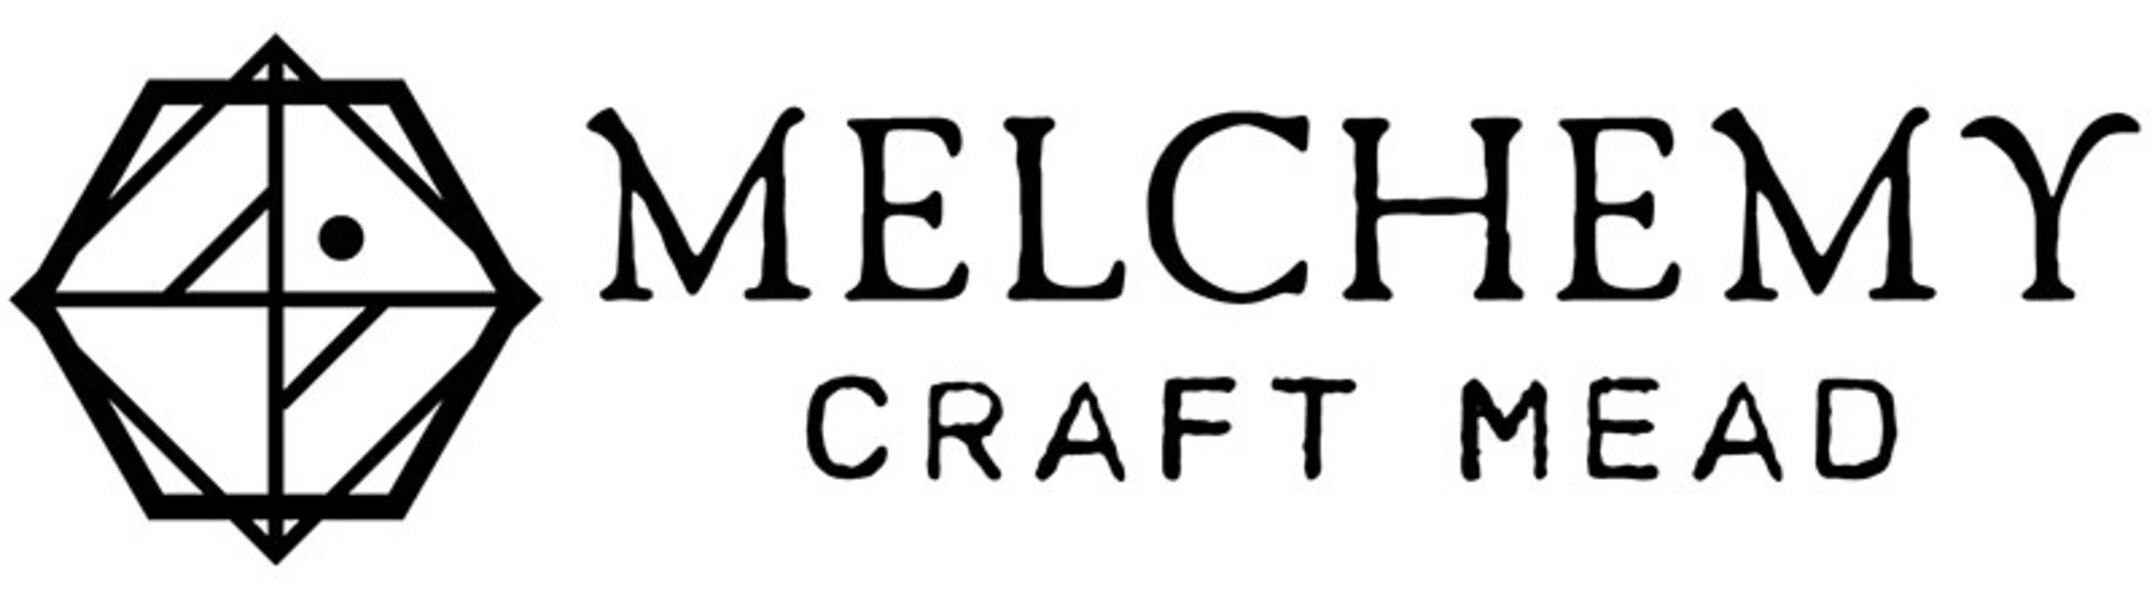 Brand for Melchemy Craft Mead